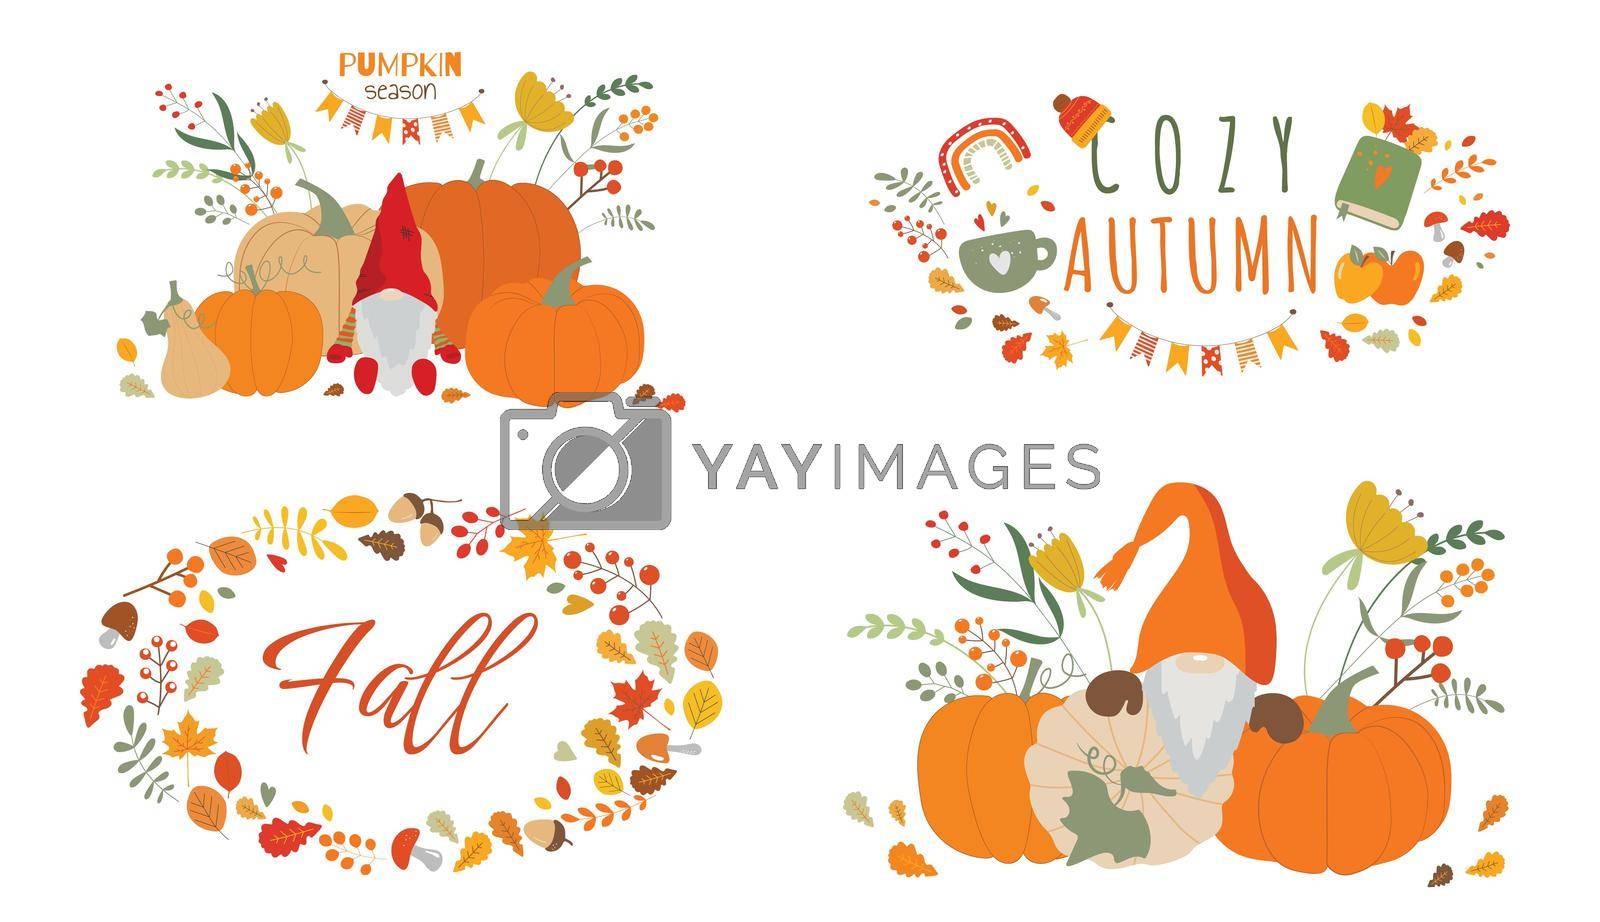 Royalty free image of Halloween vector painting by tan4ikk1